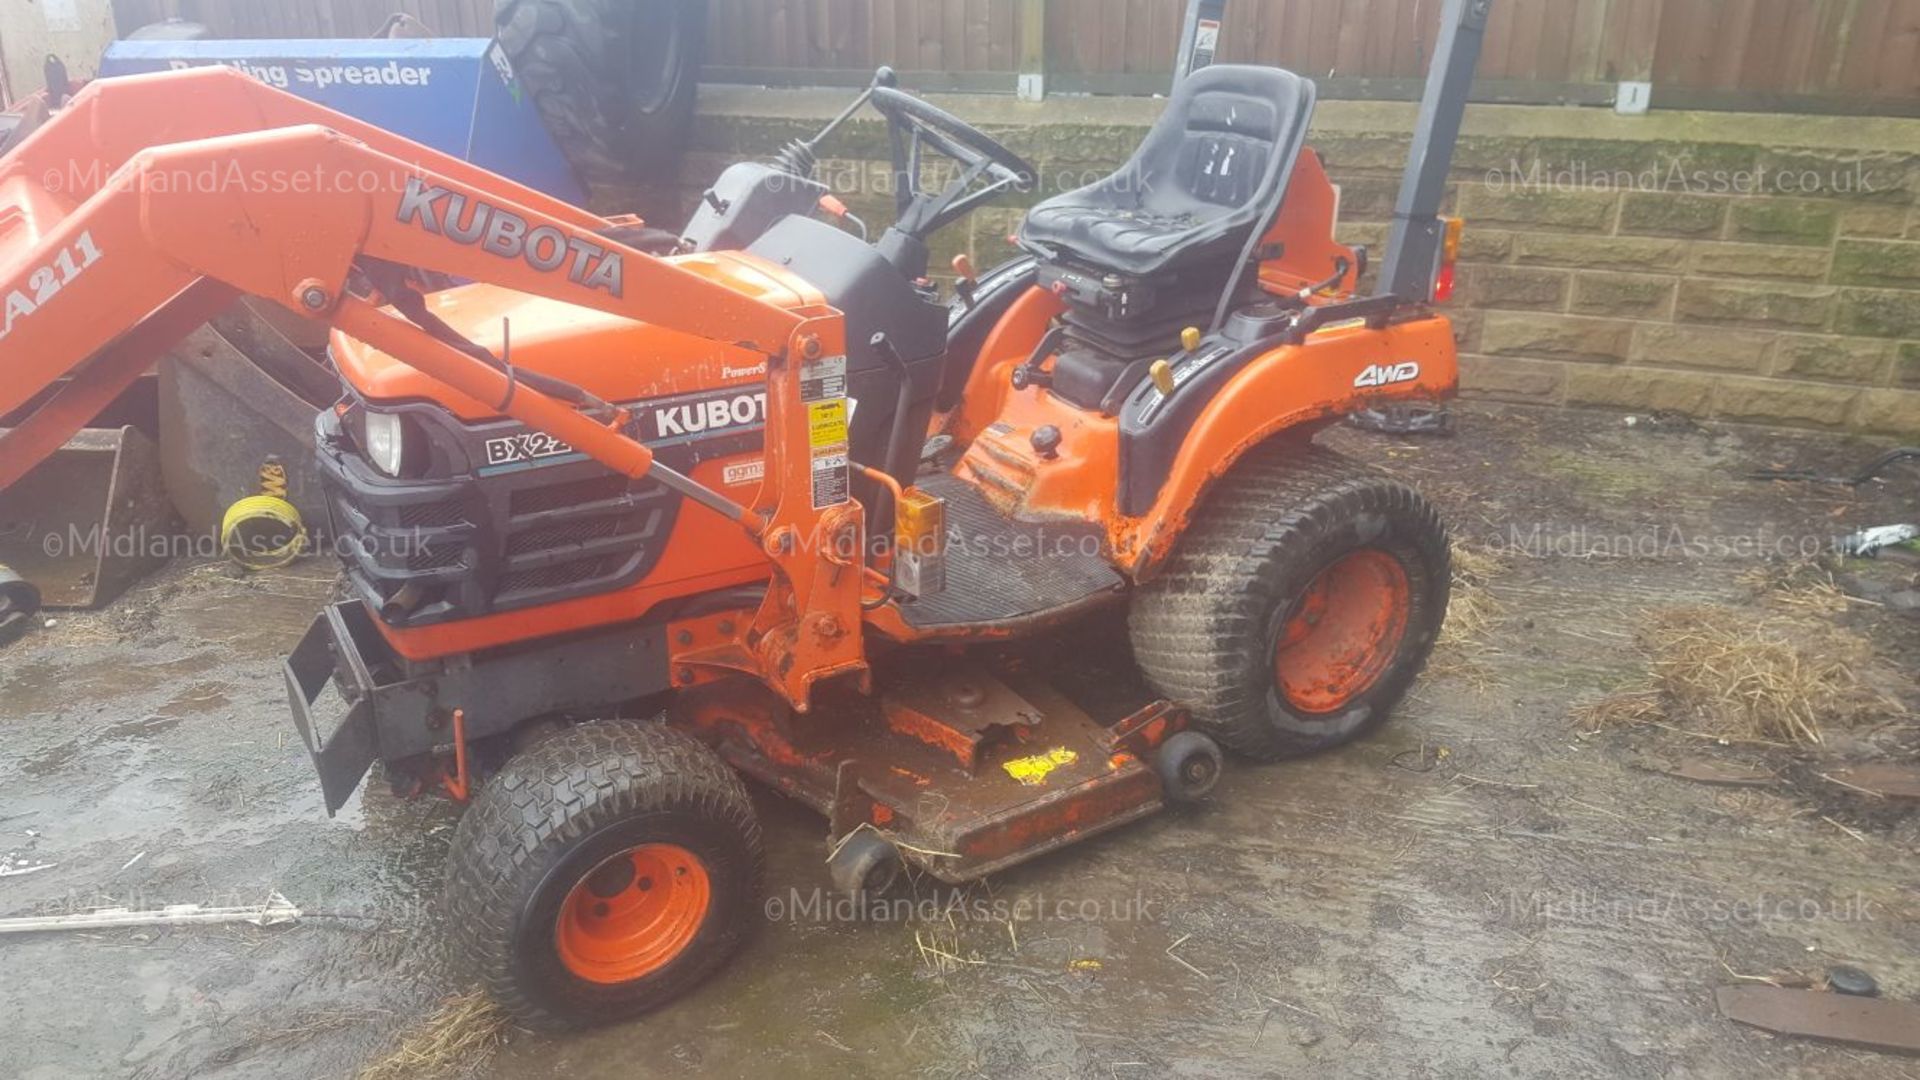 2005 KUBOTA BX2200 TRACTOR MOWER FITTED WITH LA211-1-EU LOADER, STARTS, DRIVES, MOWS AND LIFTS - Image 3 of 12